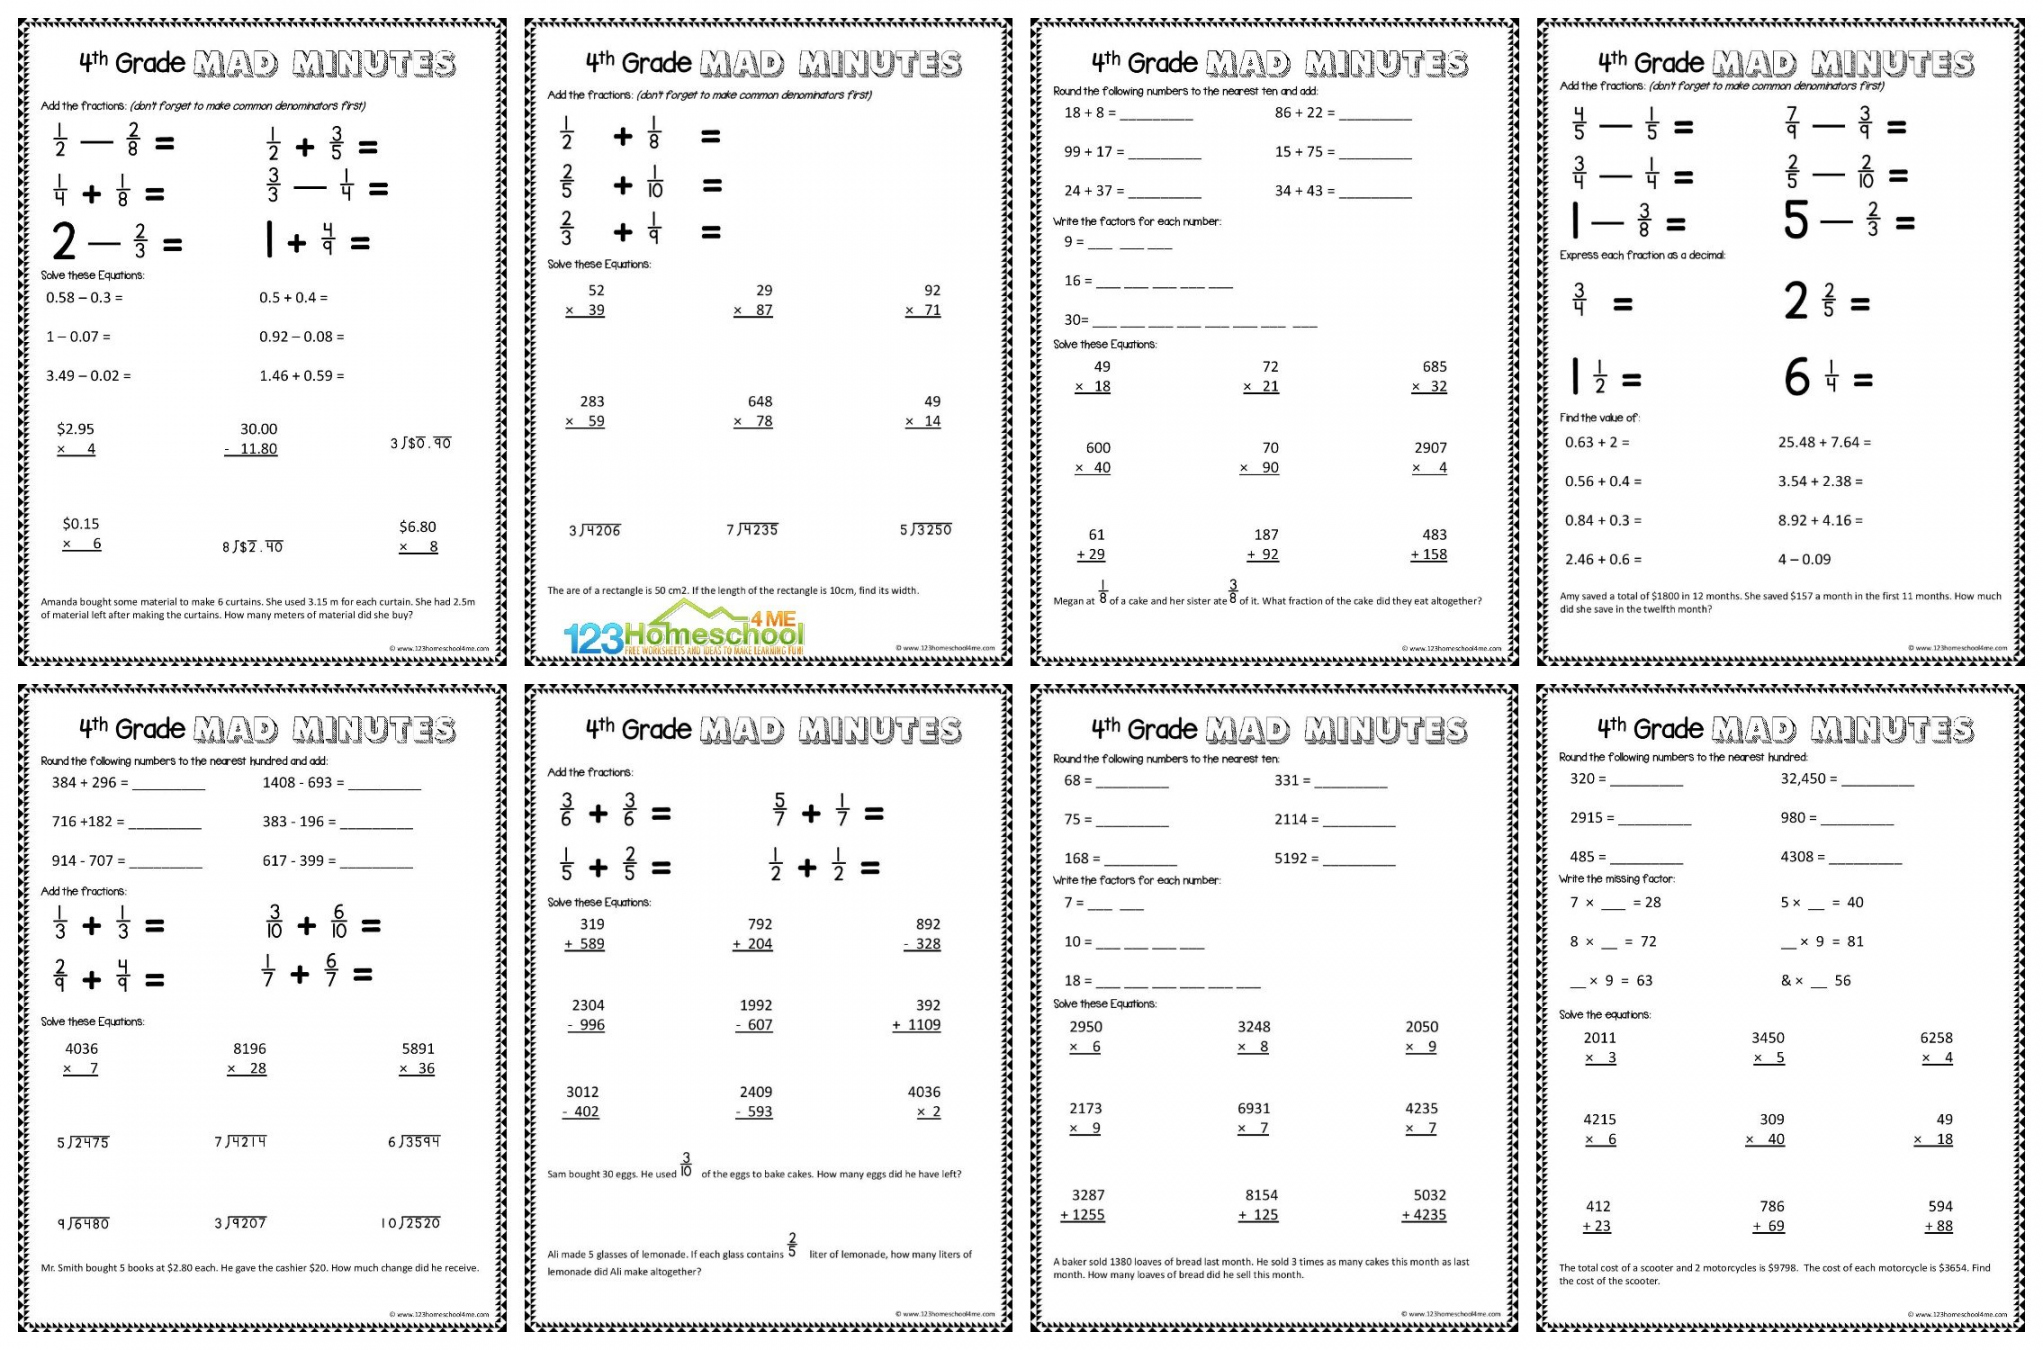 Math Worksheets For 4th Graders Free Printables - Printable - ✏️ FREE Printable th Grade Math Worksheets pdf